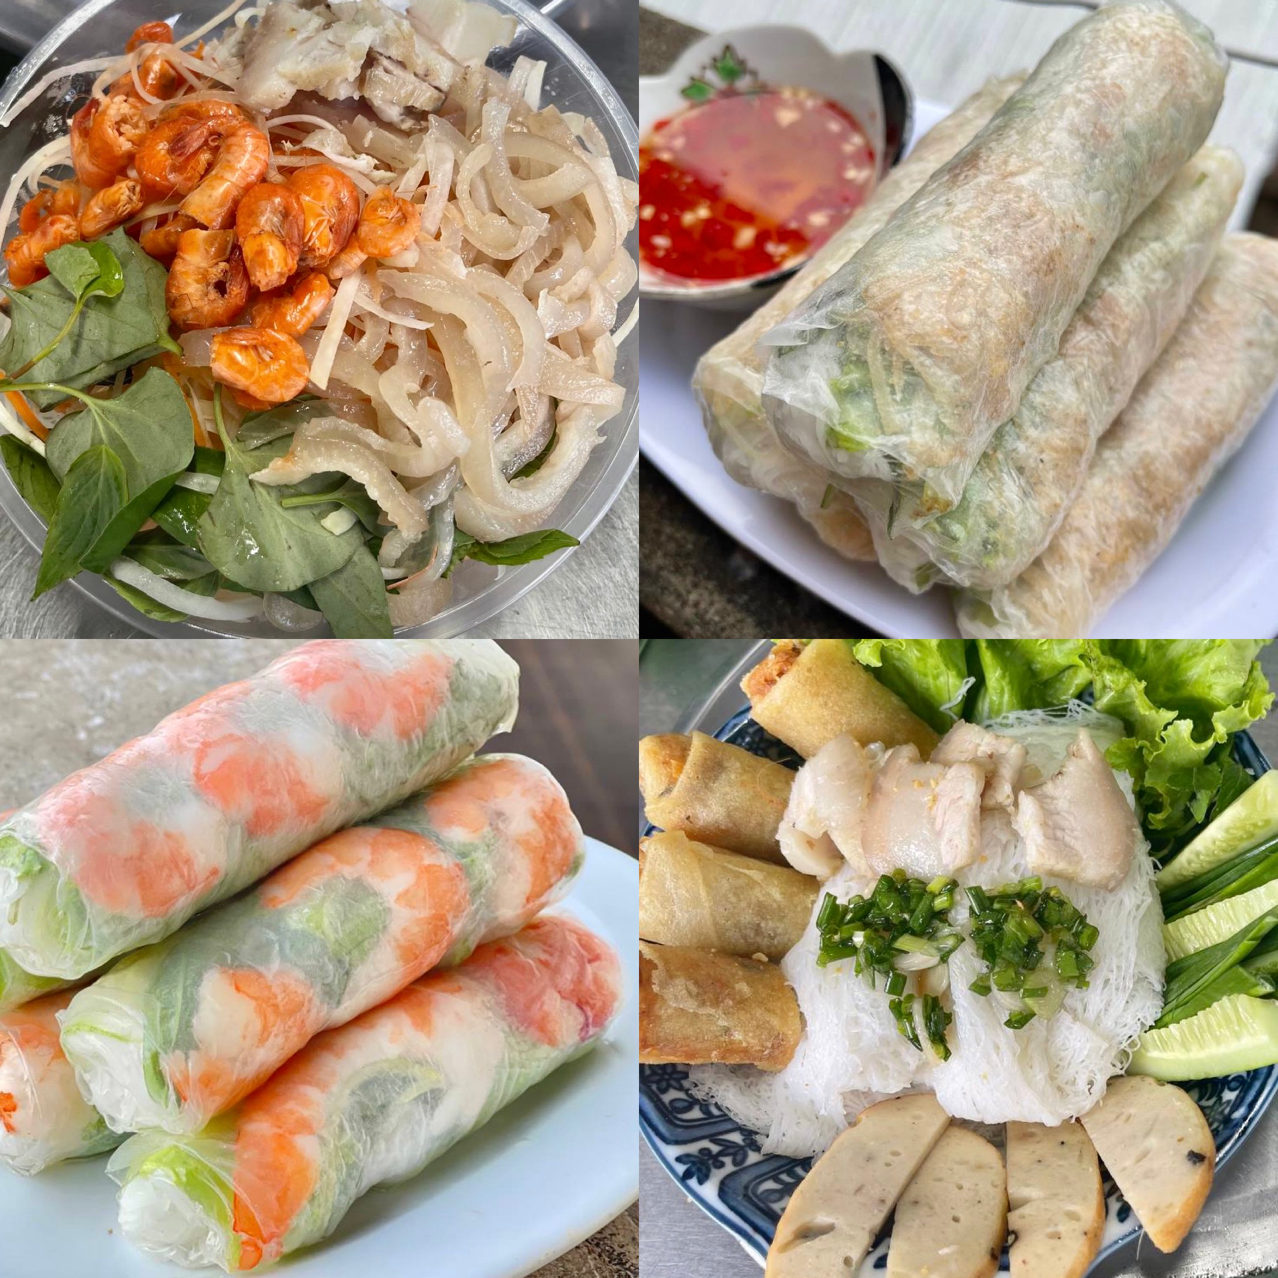 Banh Sung Yey Phan (Central Market)​ C160